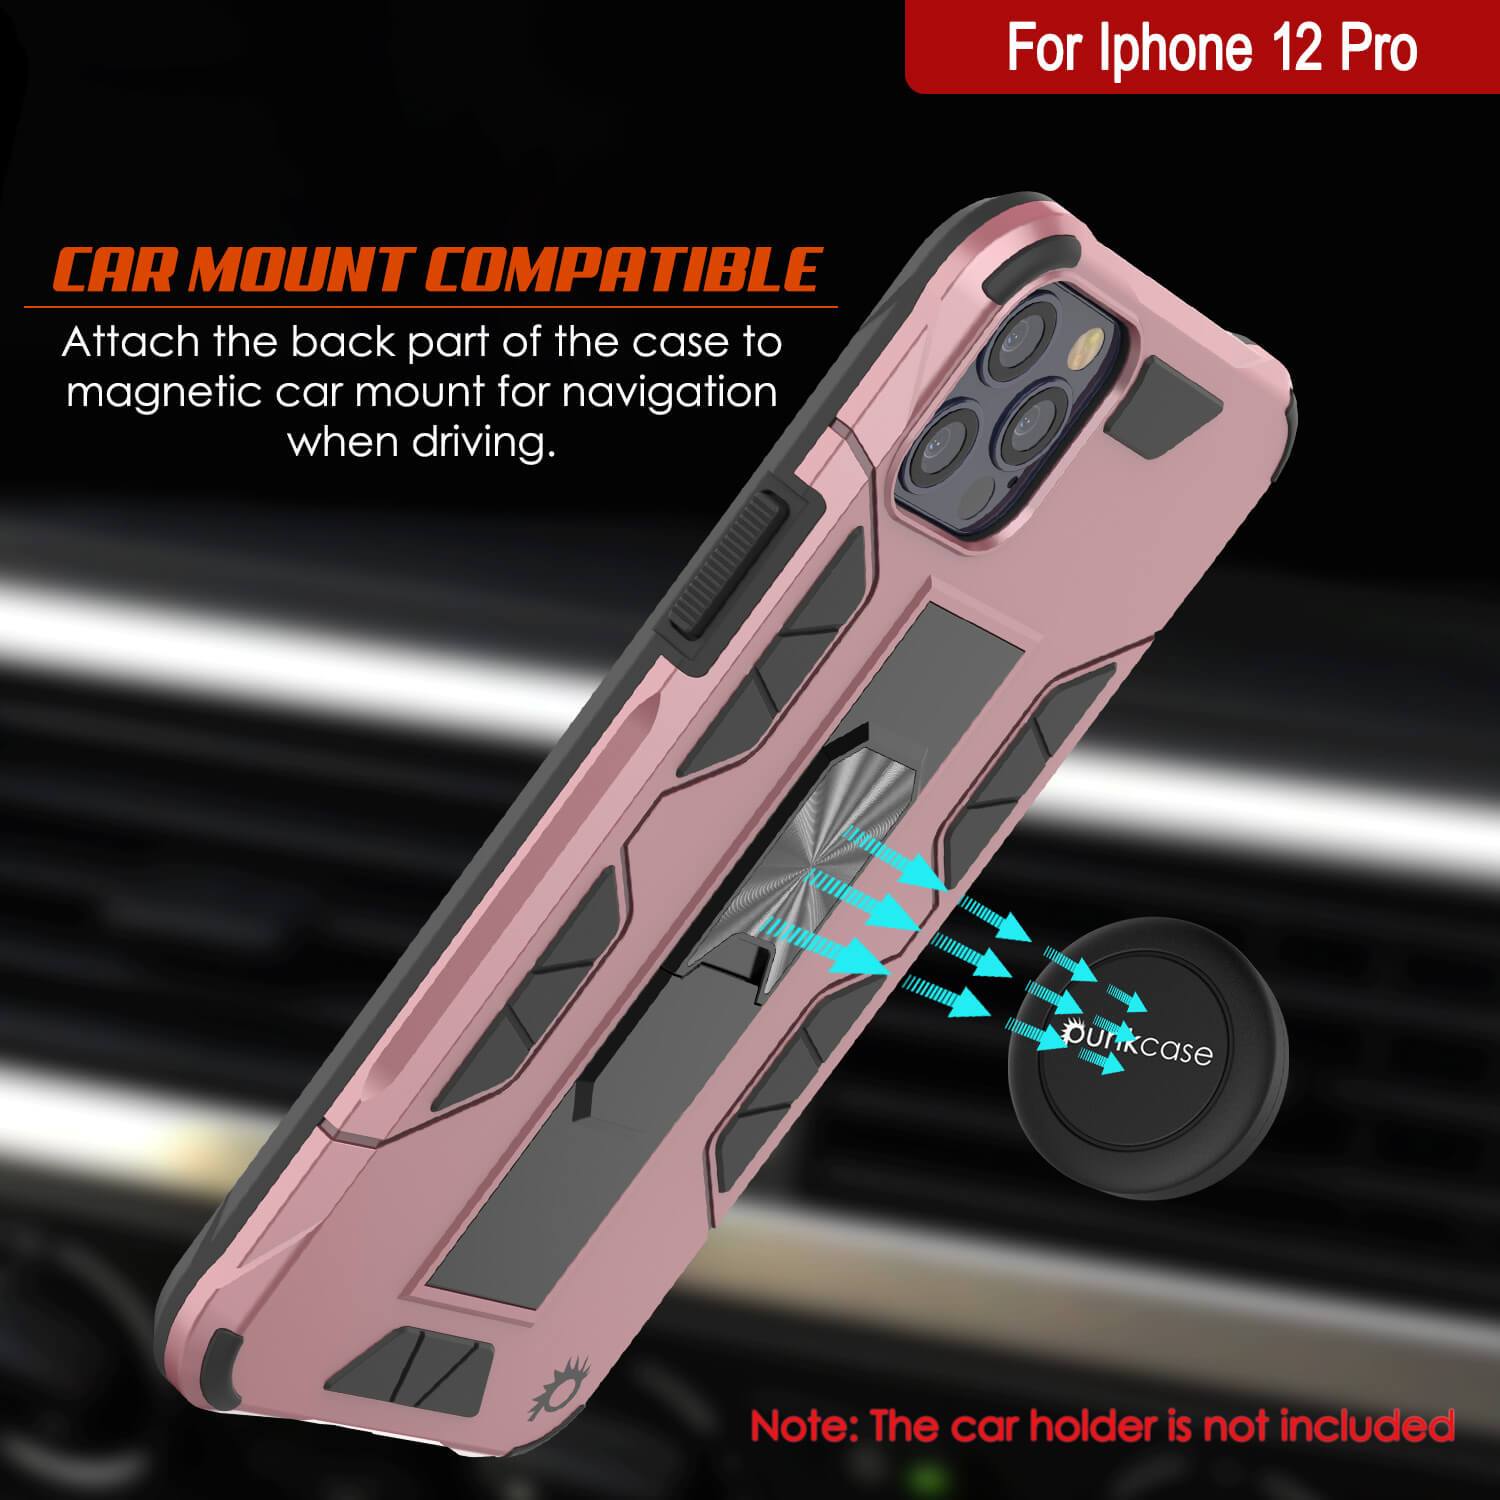 Punkcase iPhone 12 Pro Case [ArmorShield Series] Military Style Protective Dual Layer Case Rose-Gold